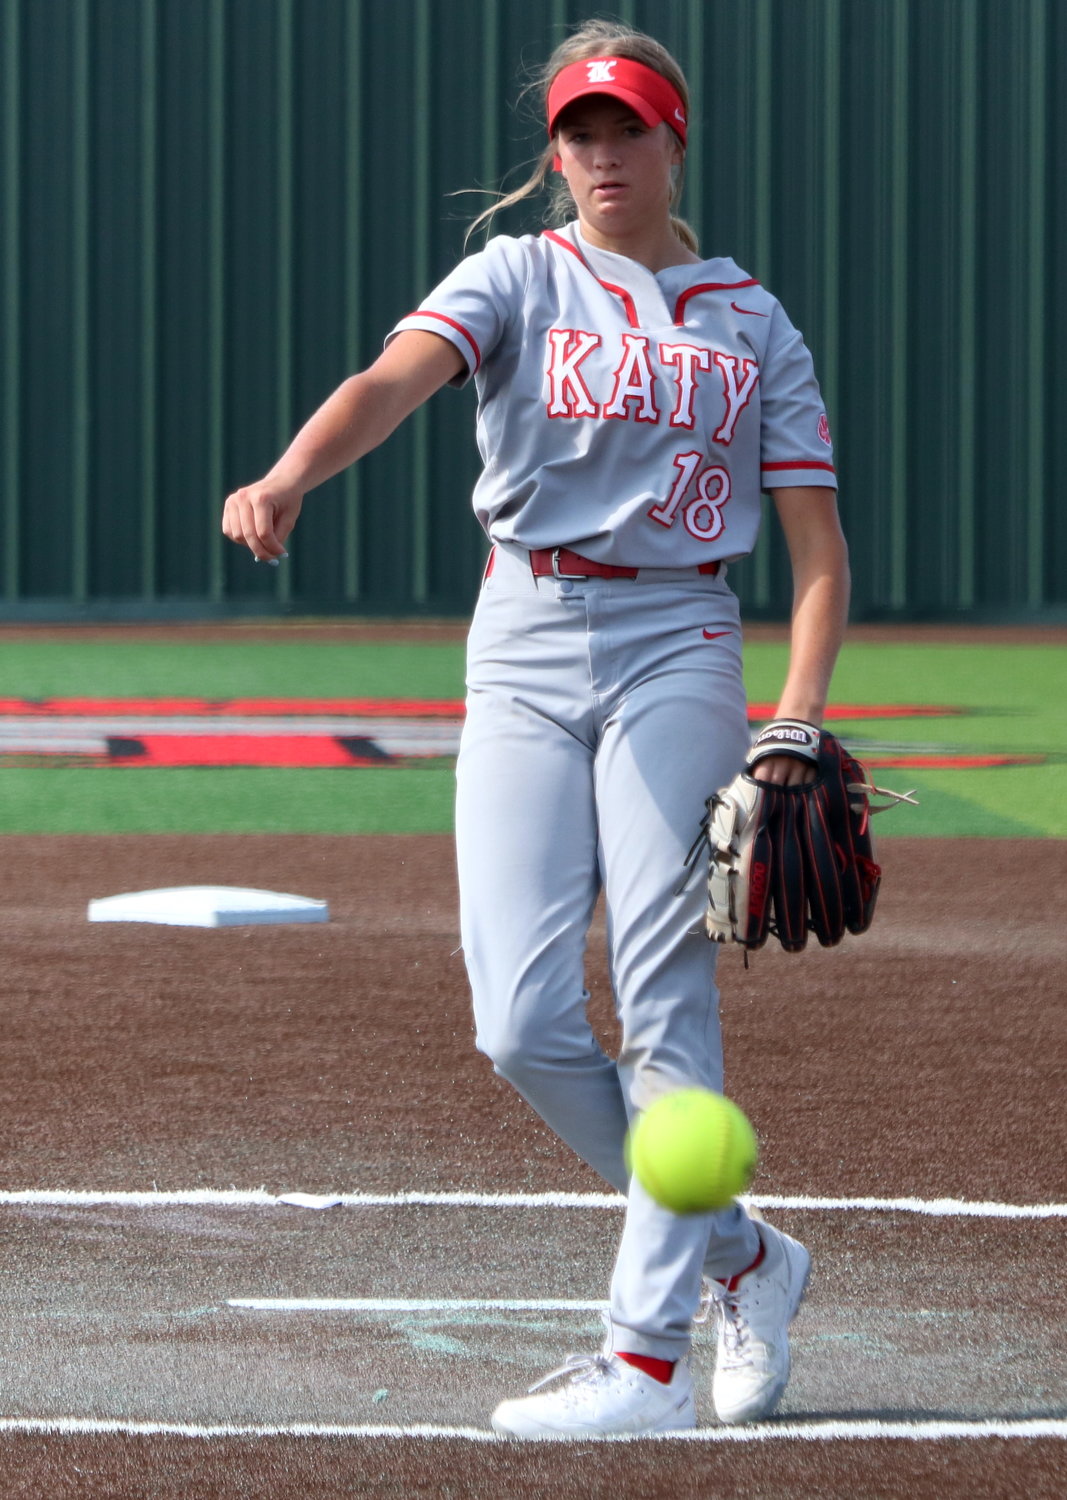 Lauryn Soeken pitches during Saturday’s area round game between Katy and Cy-Fair at Cy-Lakes.